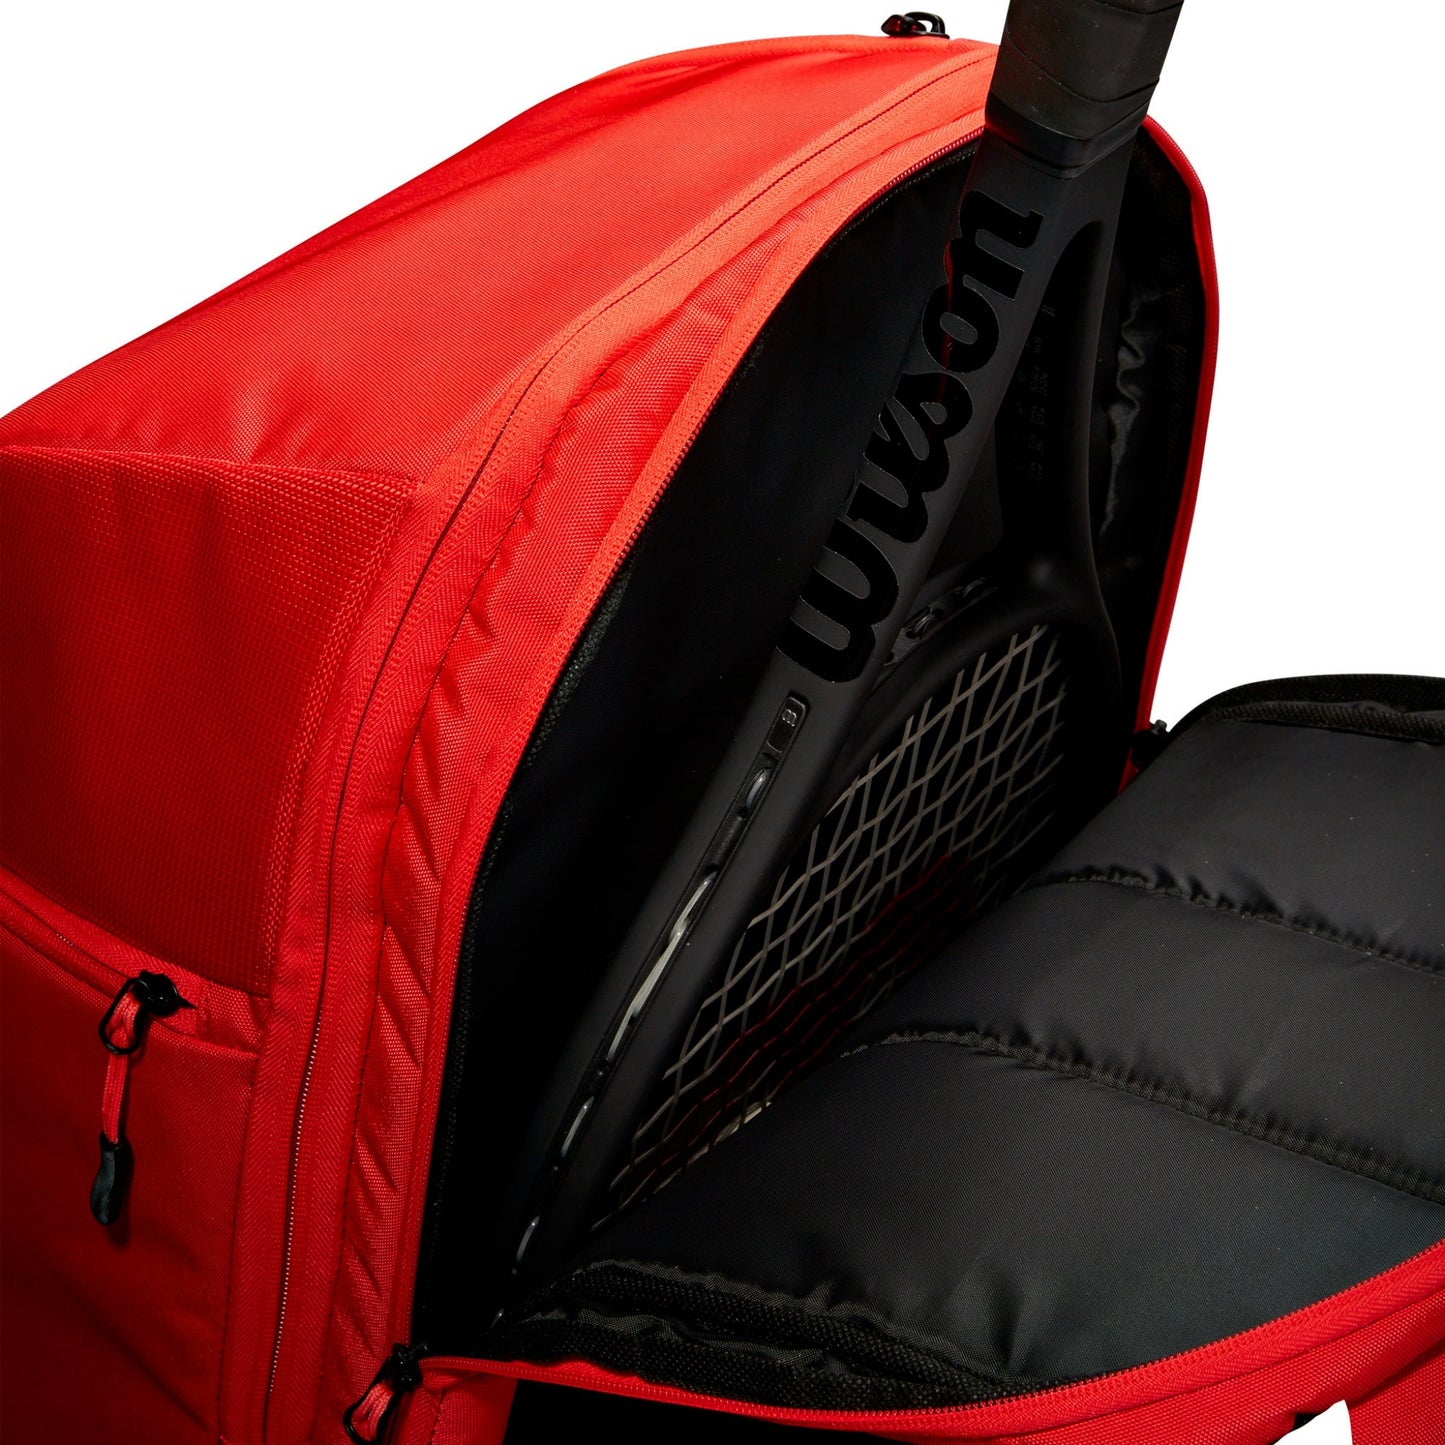 wilson-super-tour-backpack-red-interior-raquete